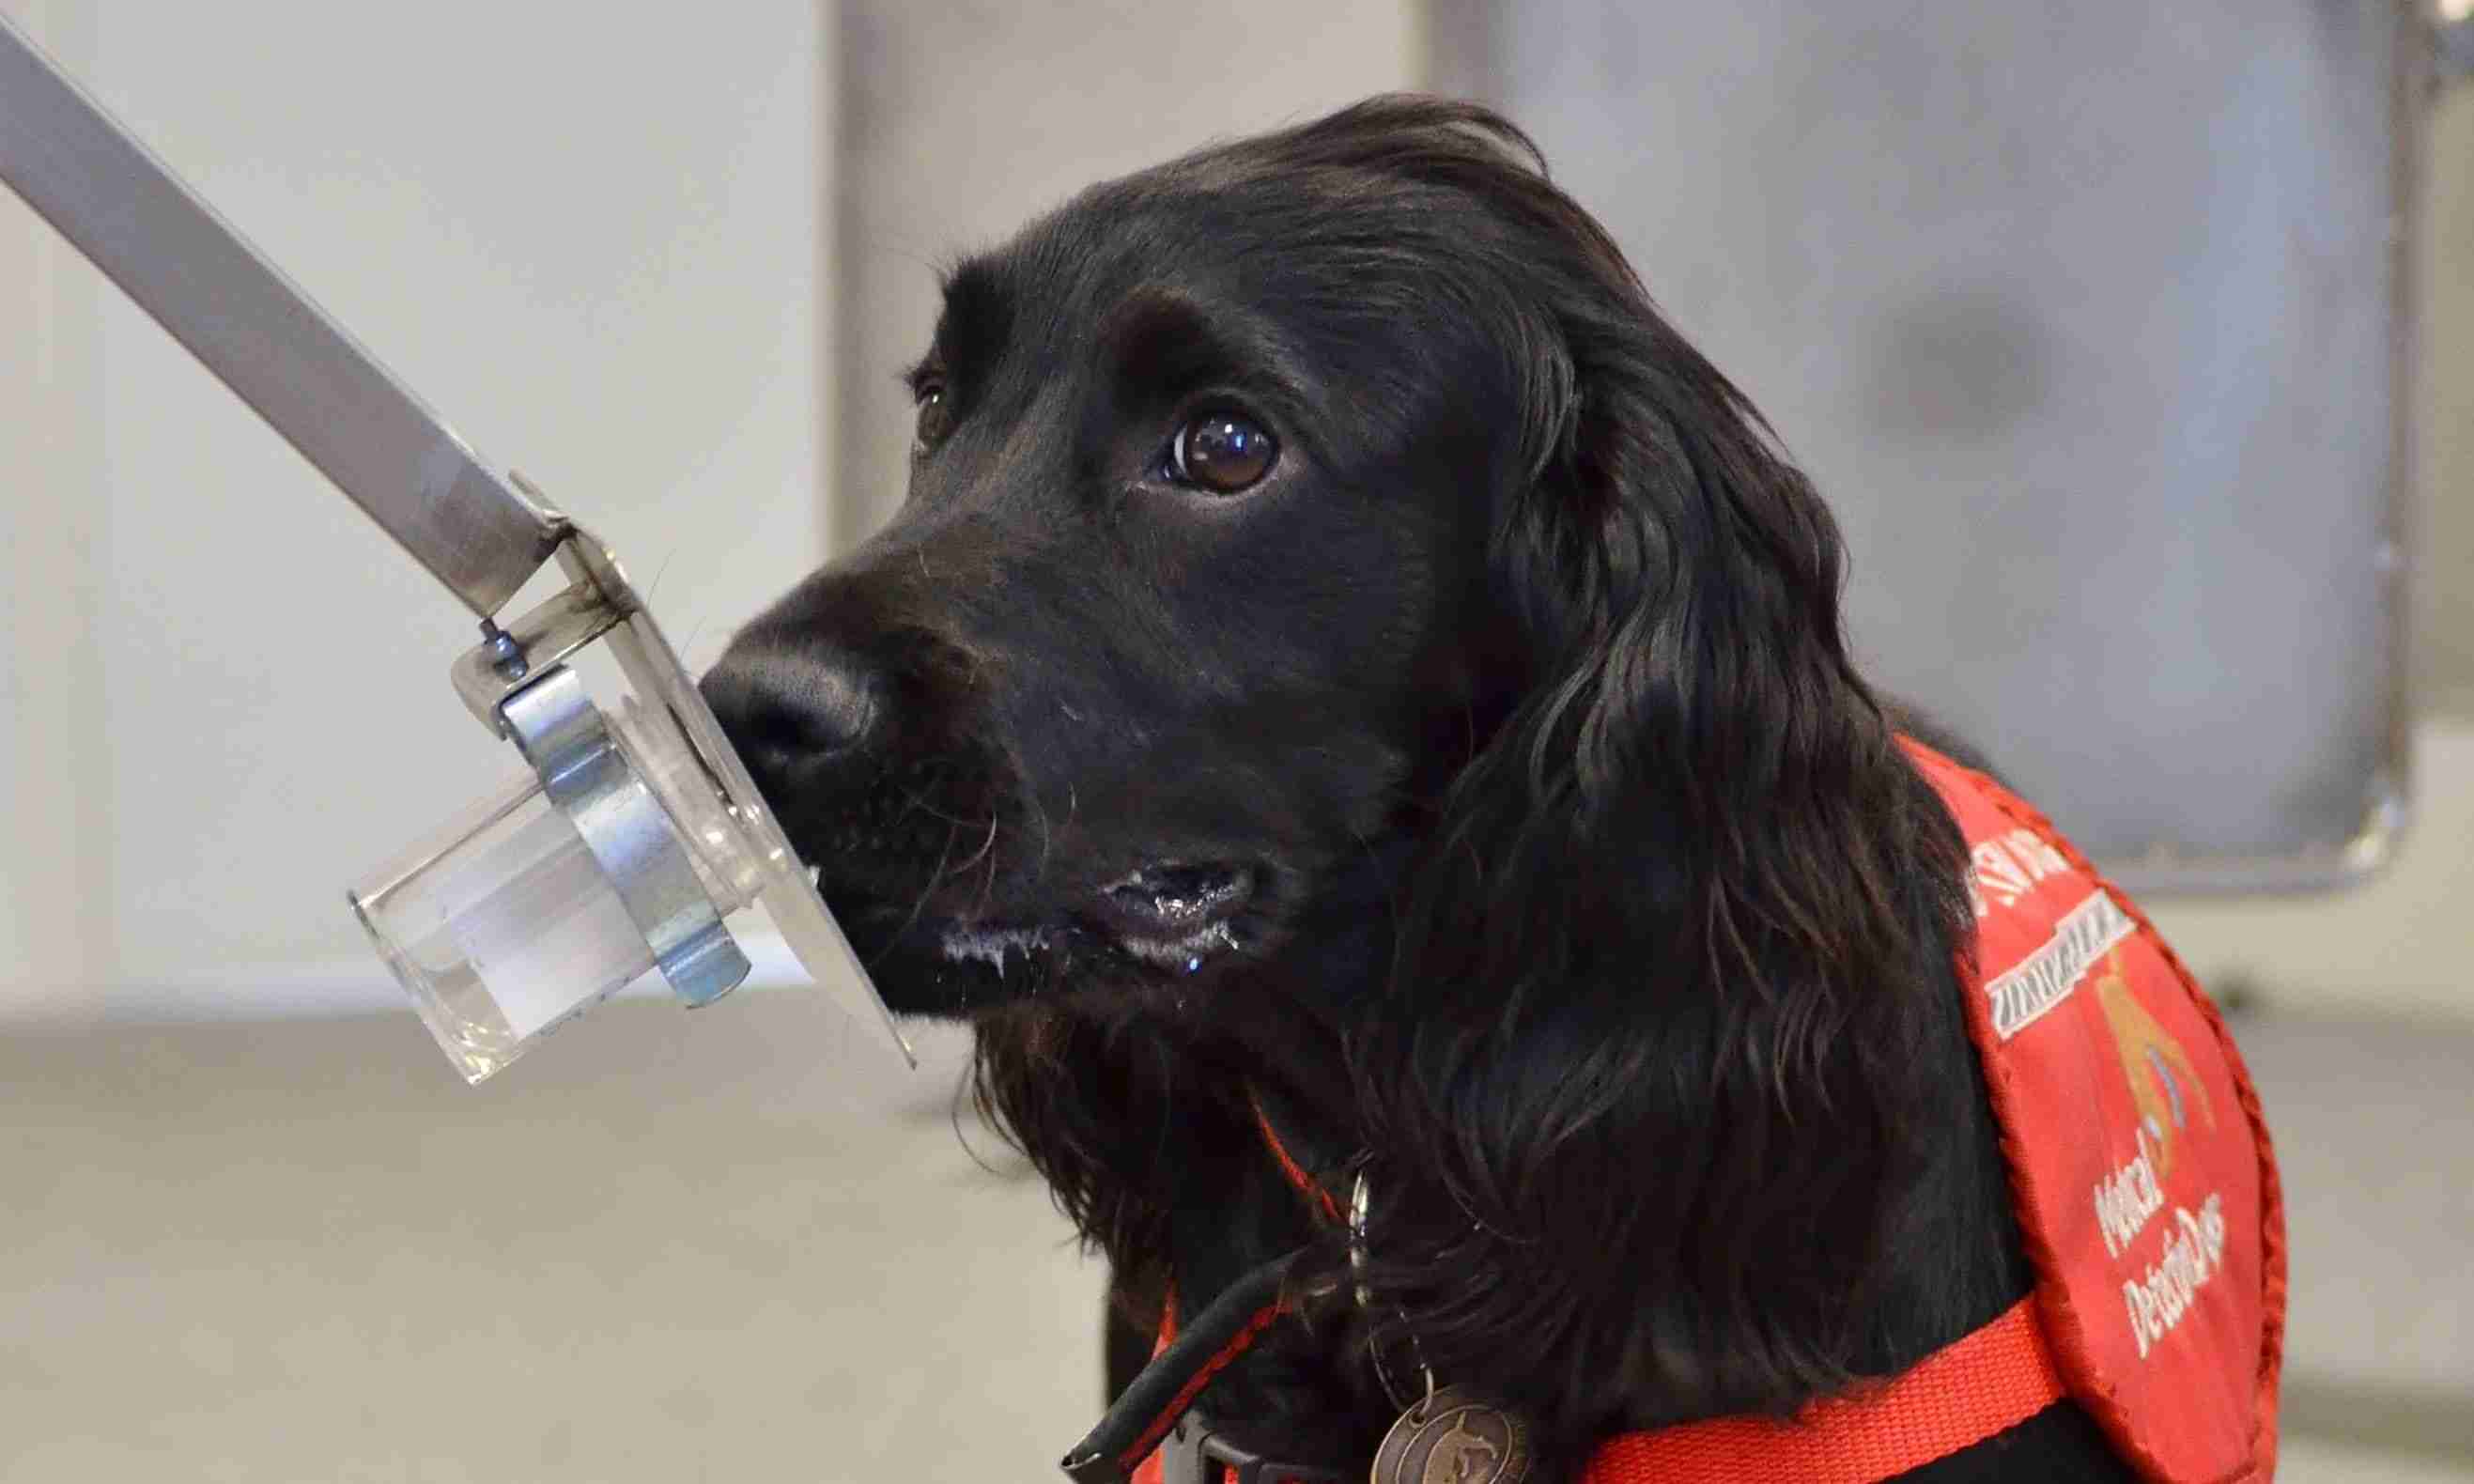 Cancer-detection dogs: a new frontier in prevention?